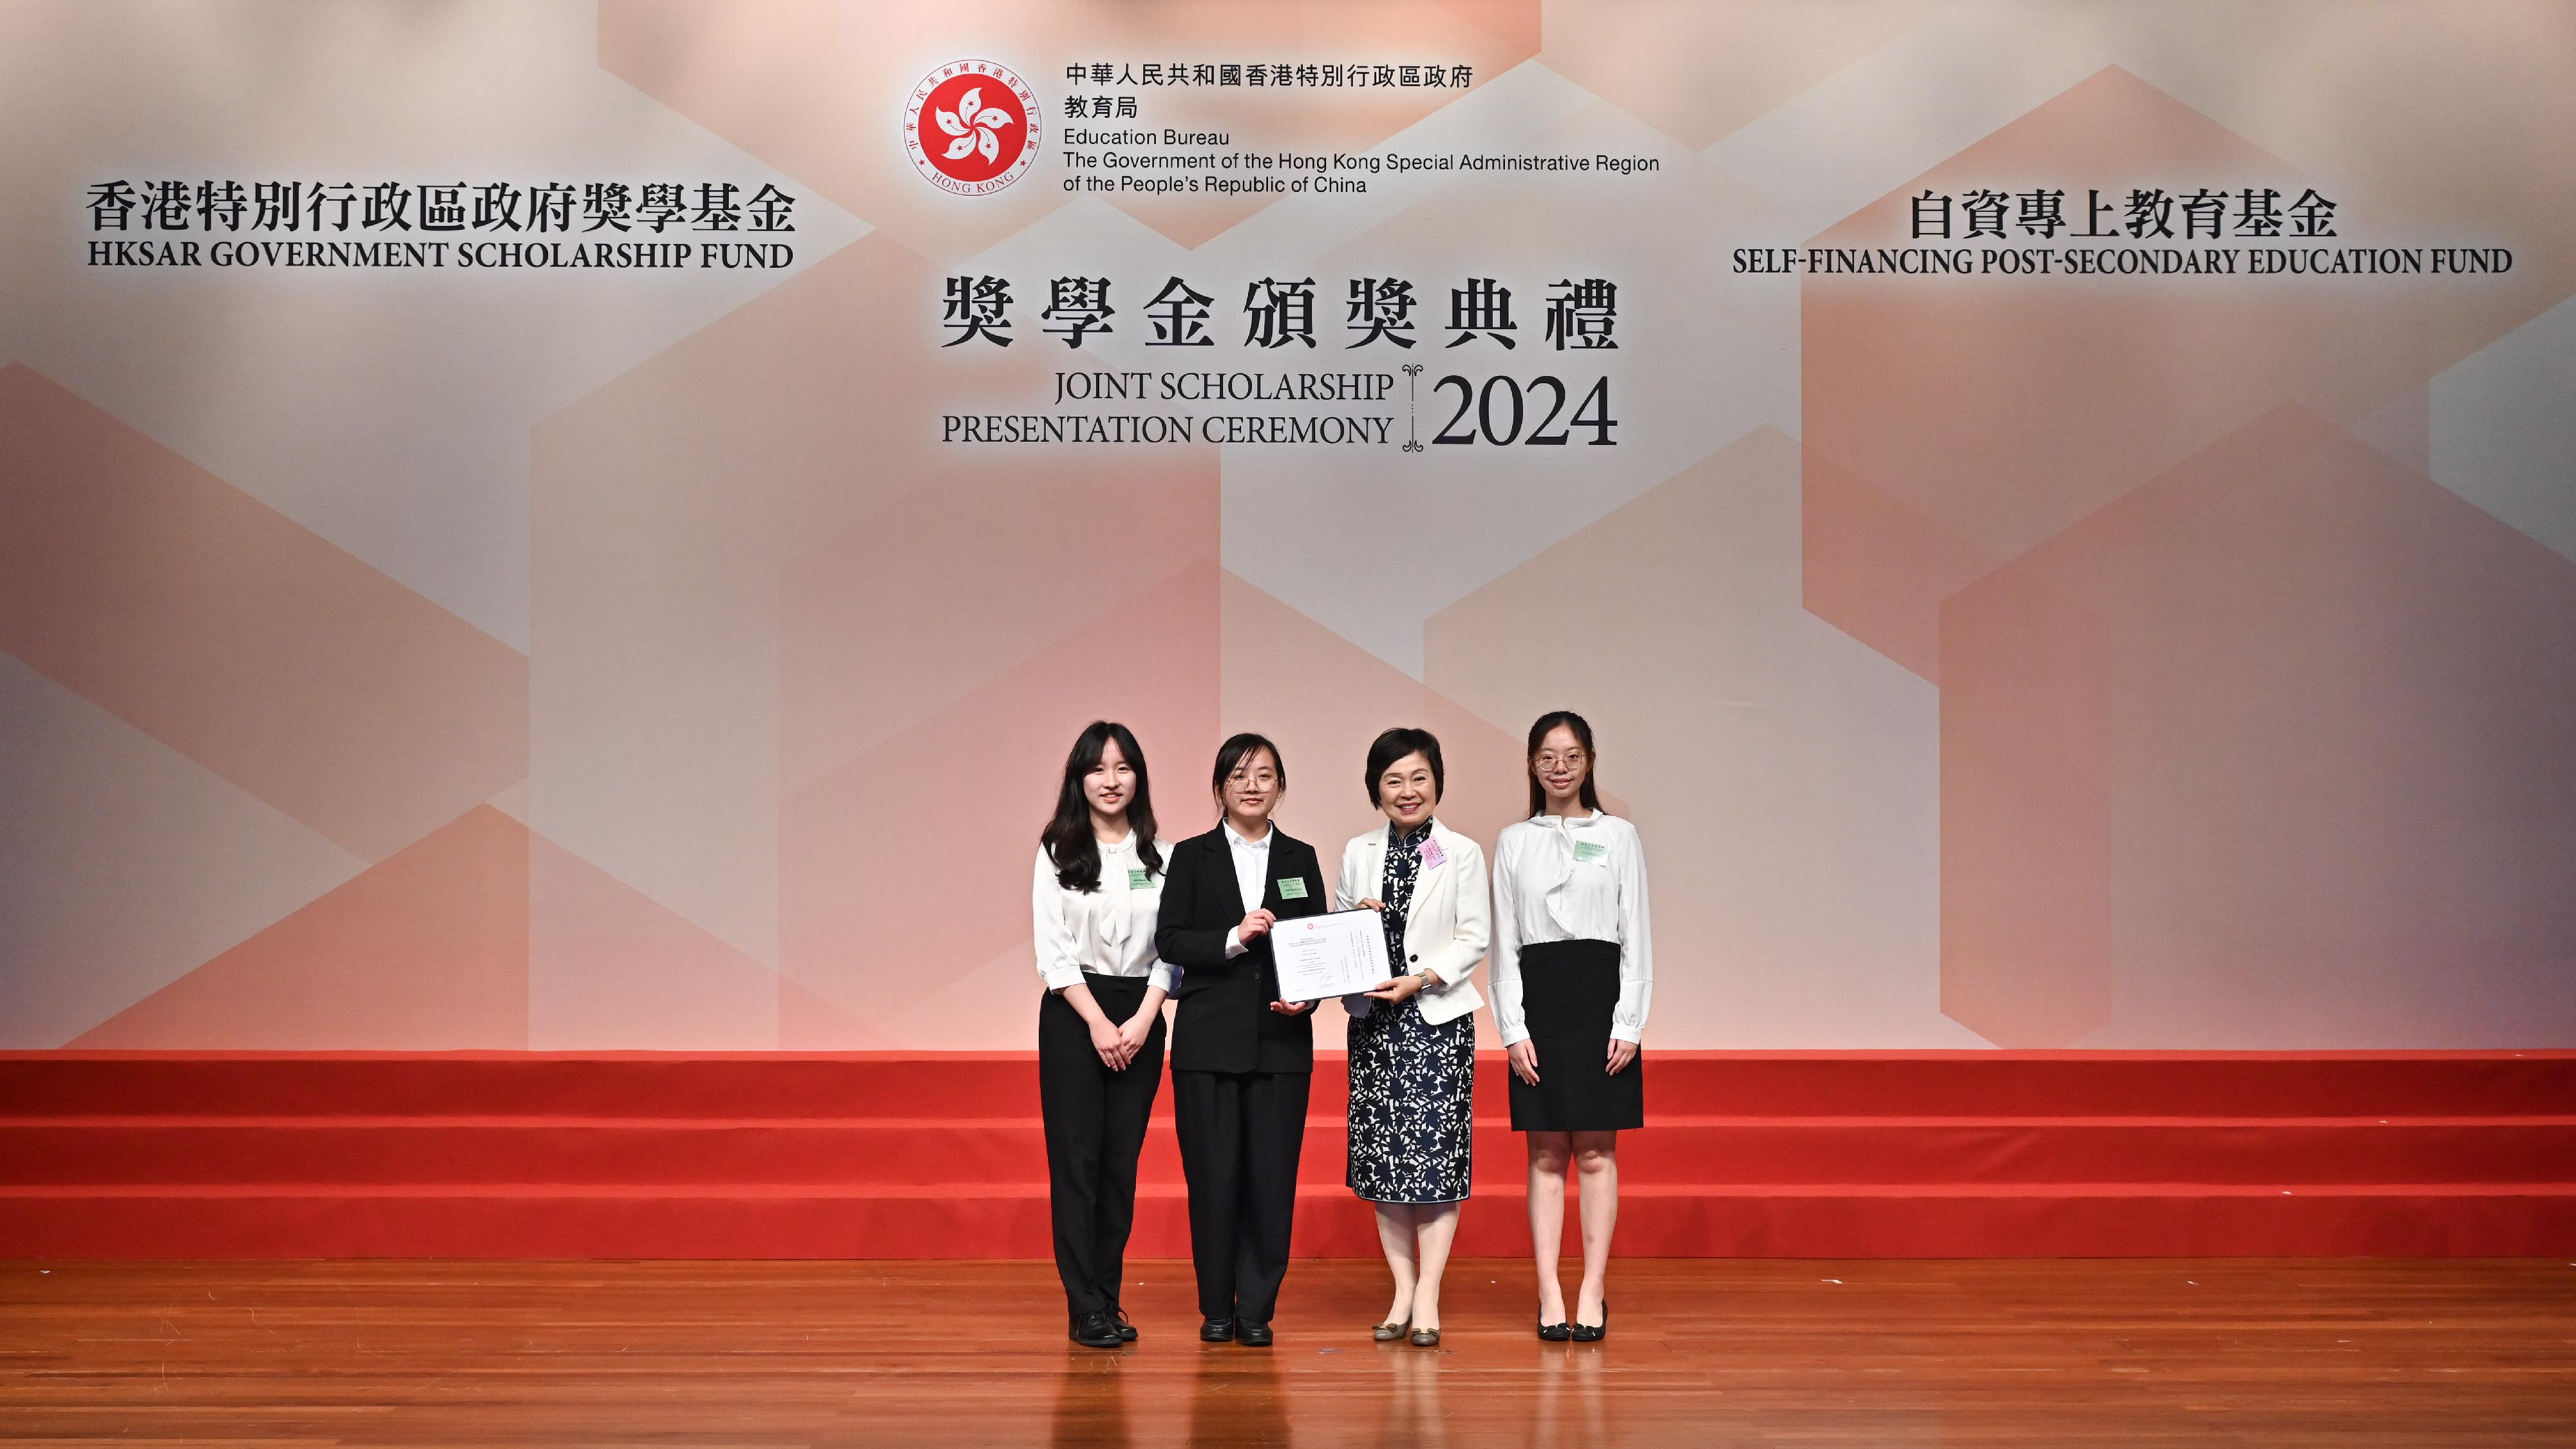 The Education Bureau held the HKSAR Government Scholarship Fund and Self-financing Post-secondary Education Fund Joint Scholarship Presentation Ceremony today (April 25). Photo shows the Secretary for Education, Dr Choi Yuk-lin (second right), presenting a certificate to students who are awarded scholarships under the HKSAR Government Scholarship Fund.
